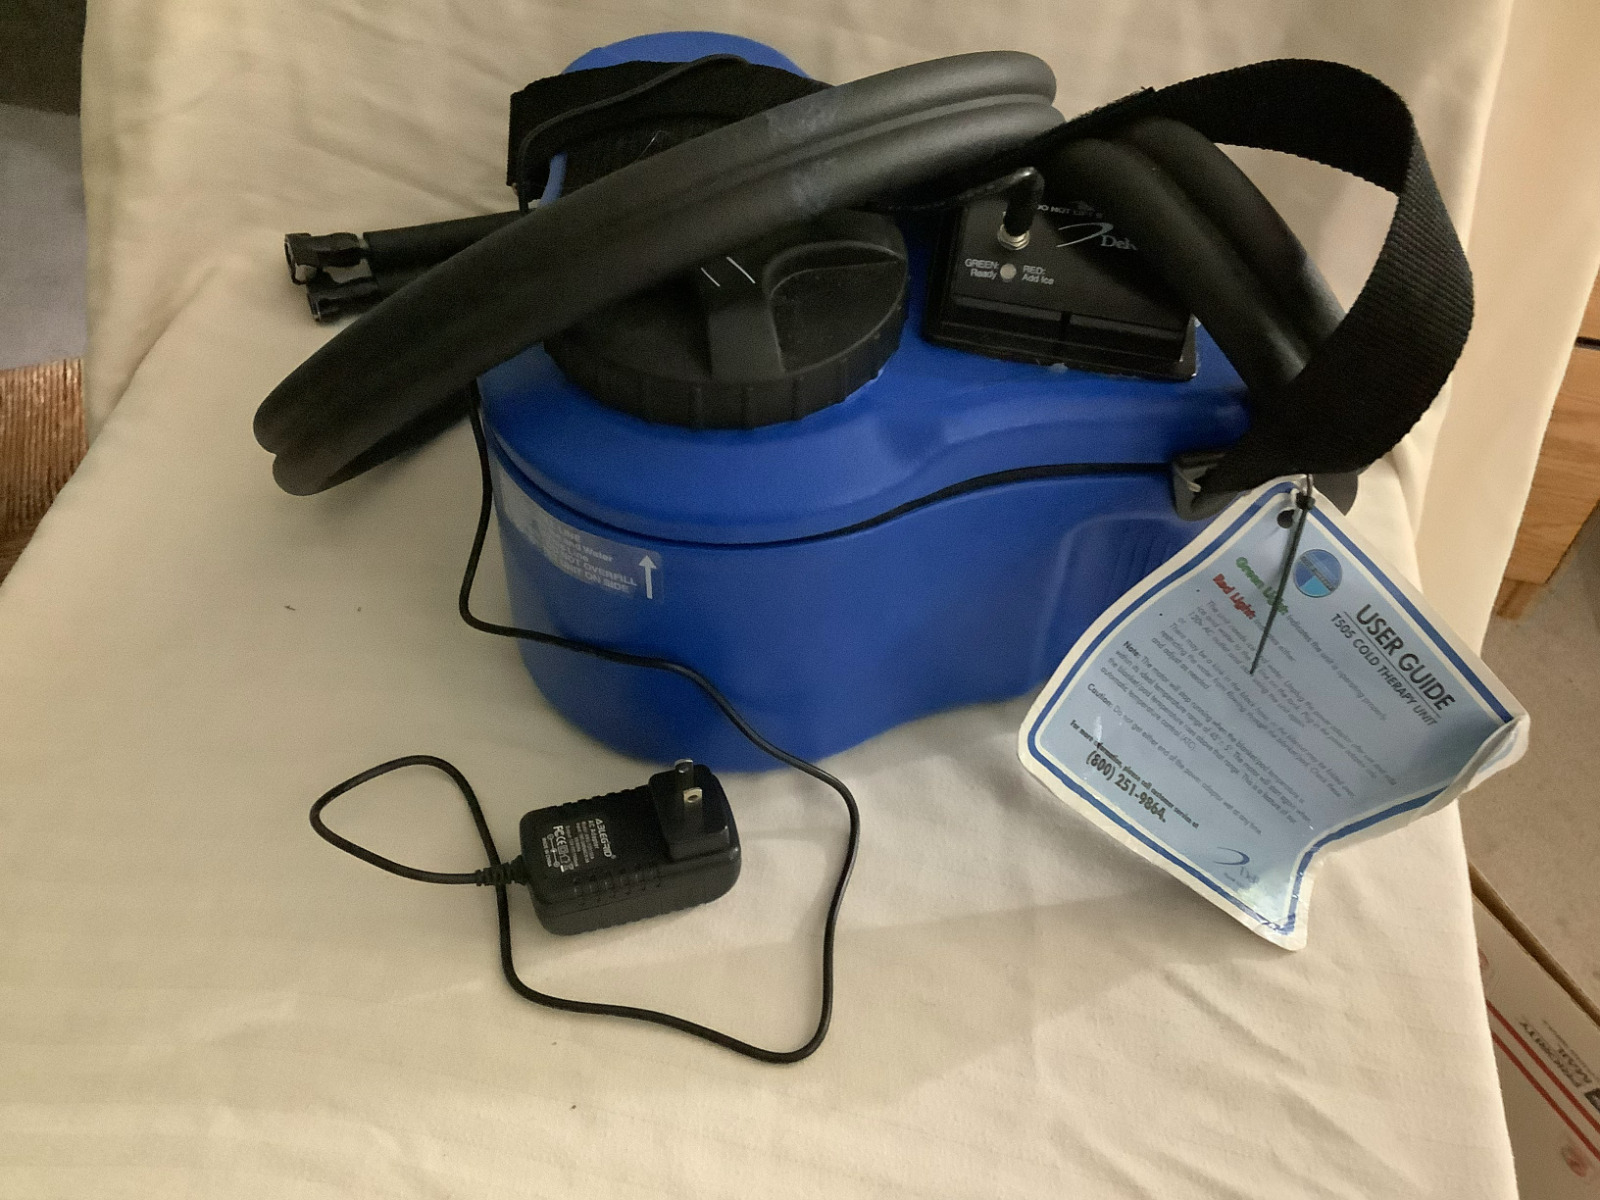 Deroyal T505 Ice Cold Heat Therapy Unit No Pad Included